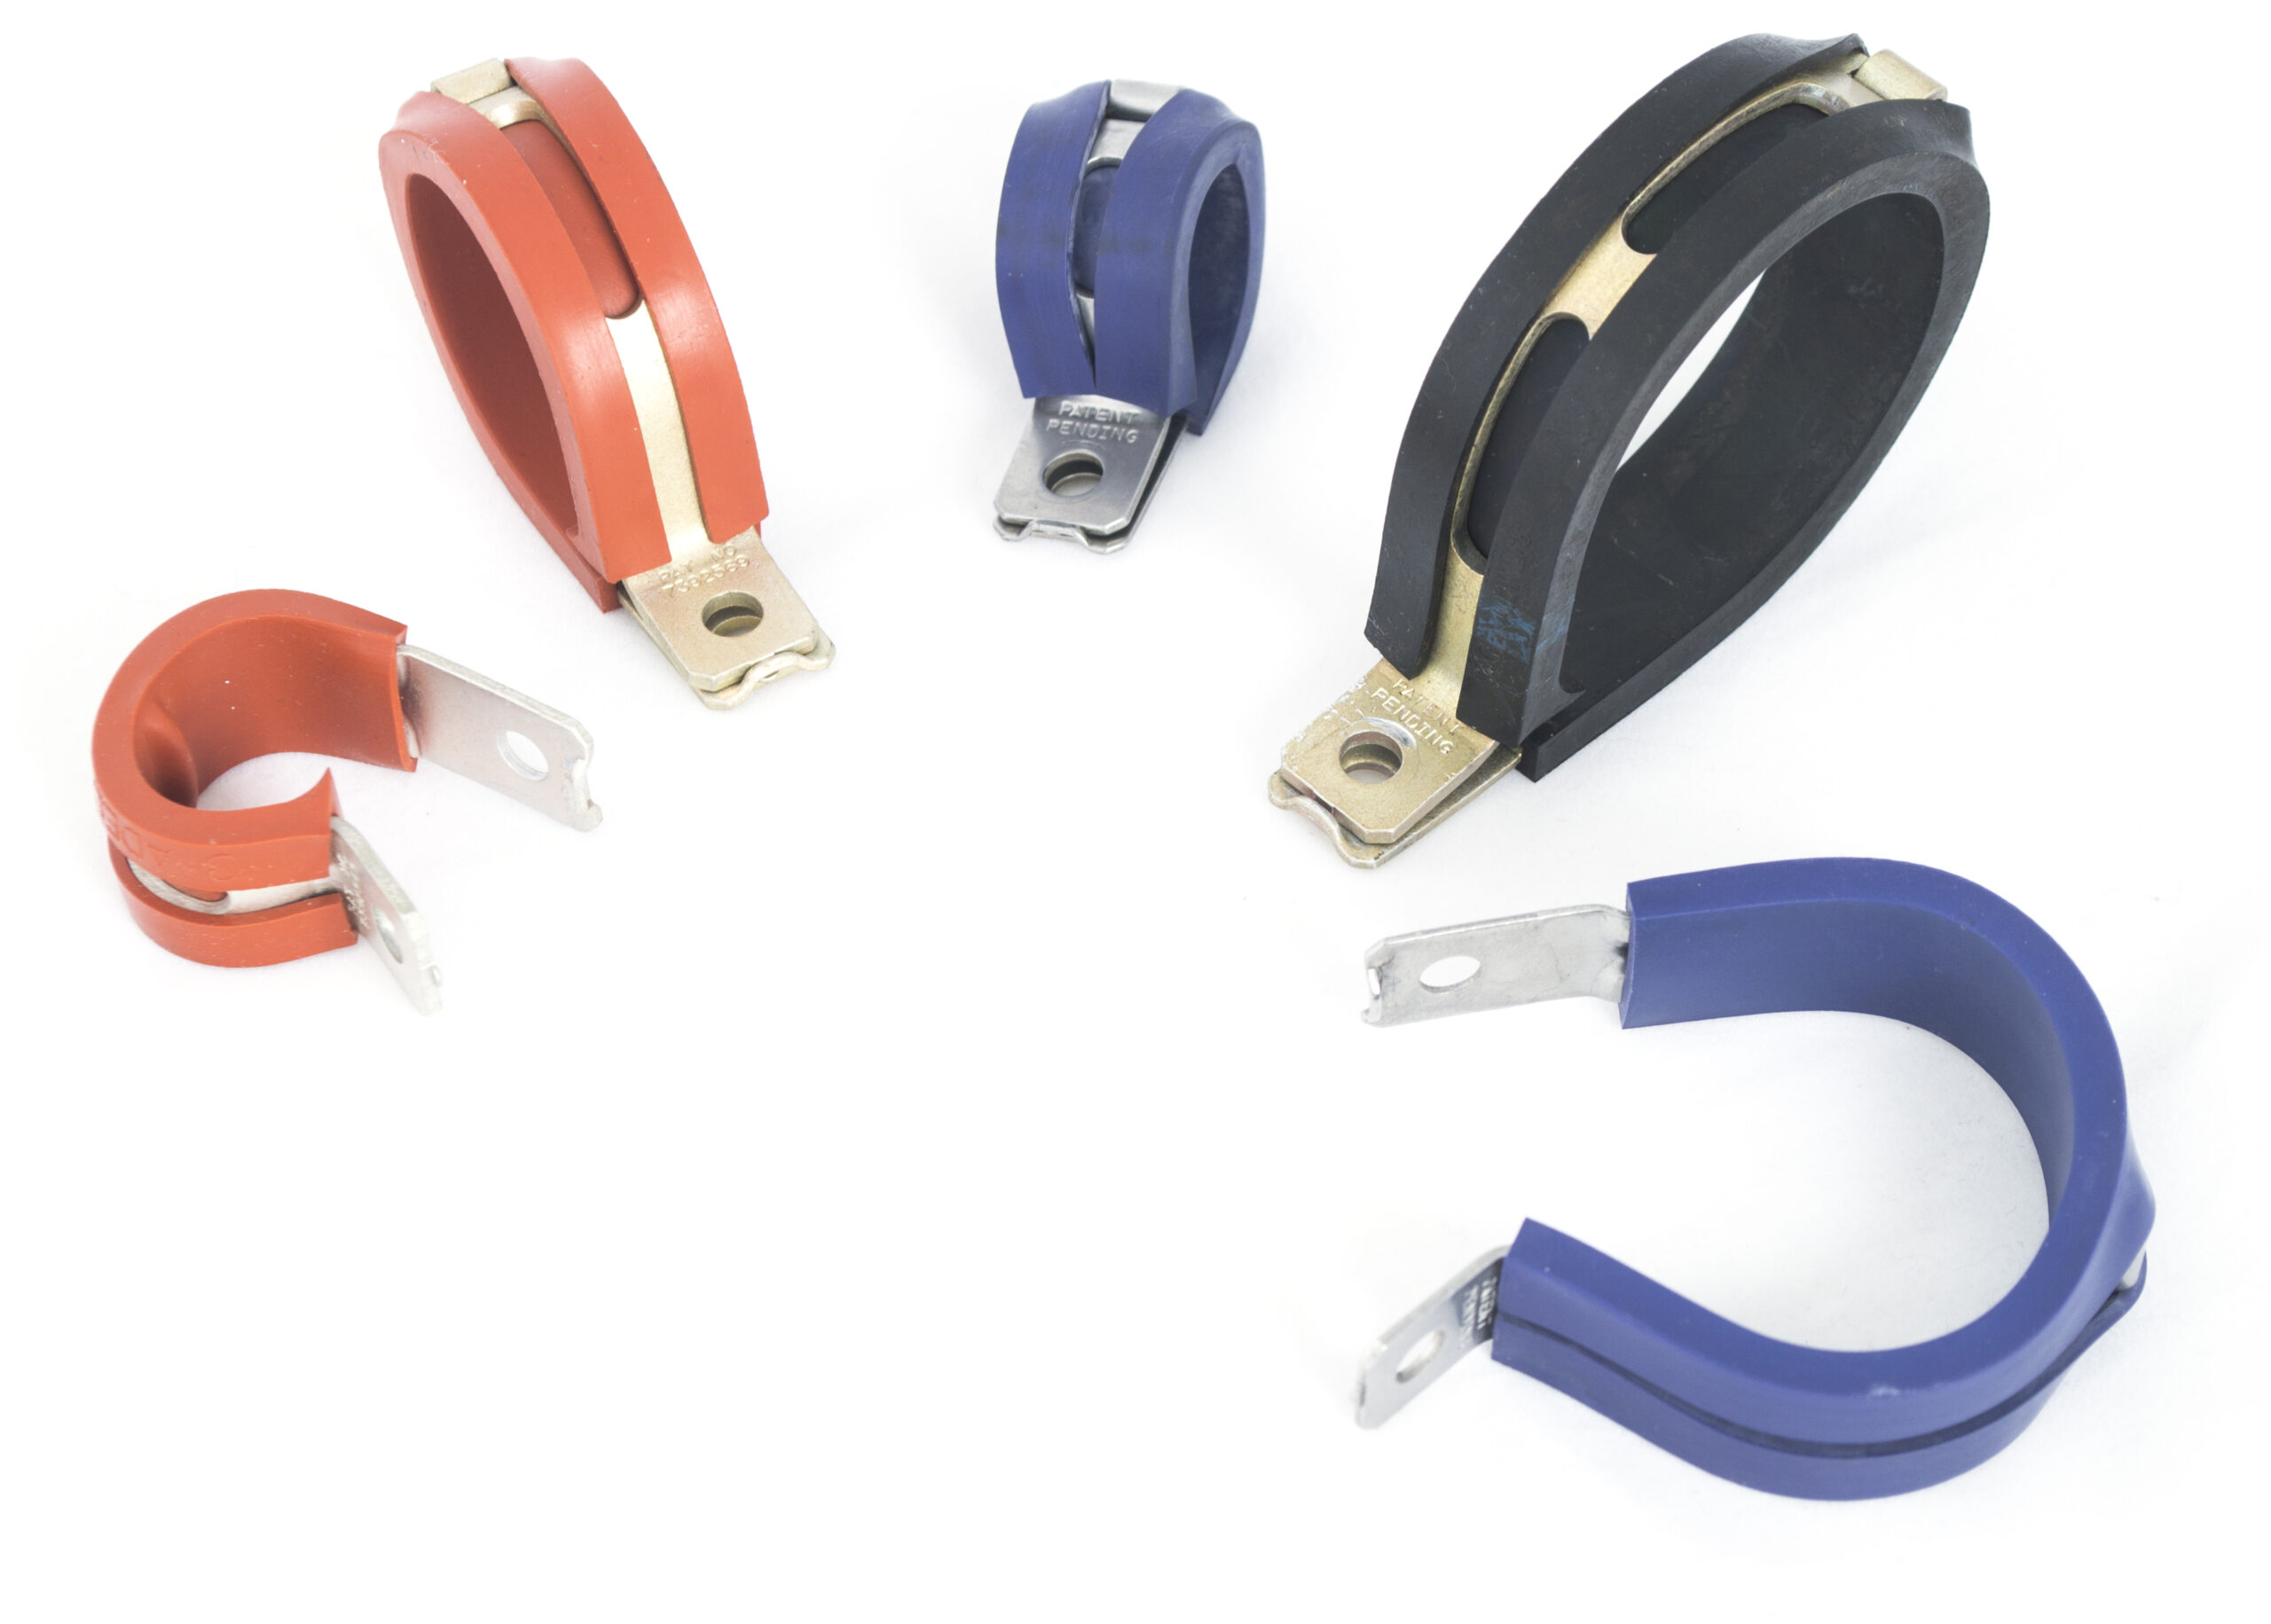 various magnetic cores in orange, blue, and black colors with universal clamps and metal attachments, isolated on a white background.